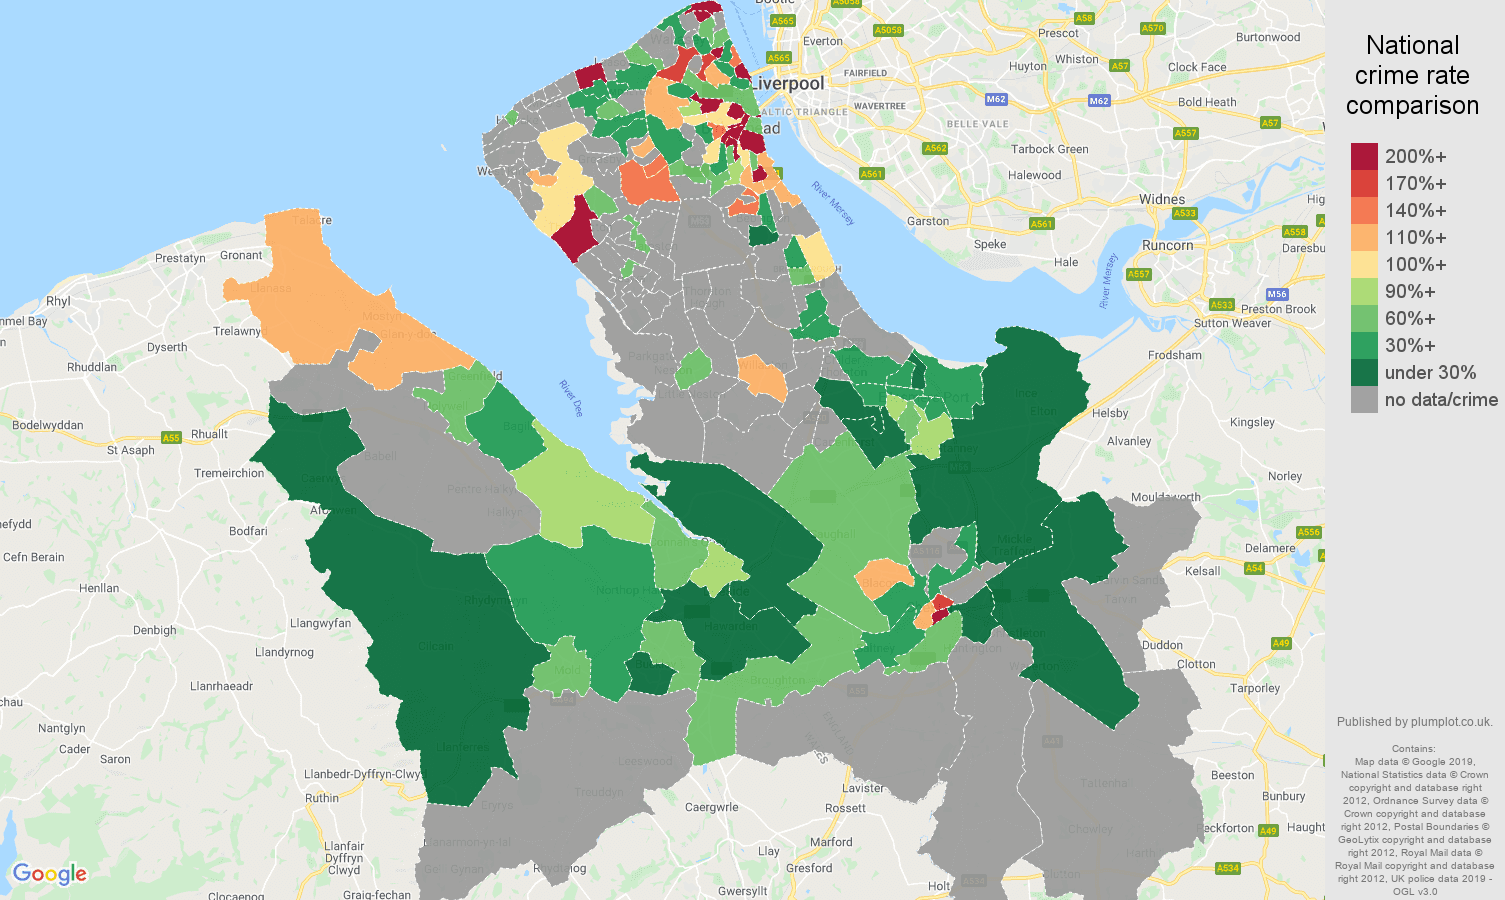 Chester possession of weapons crime rate comparison map